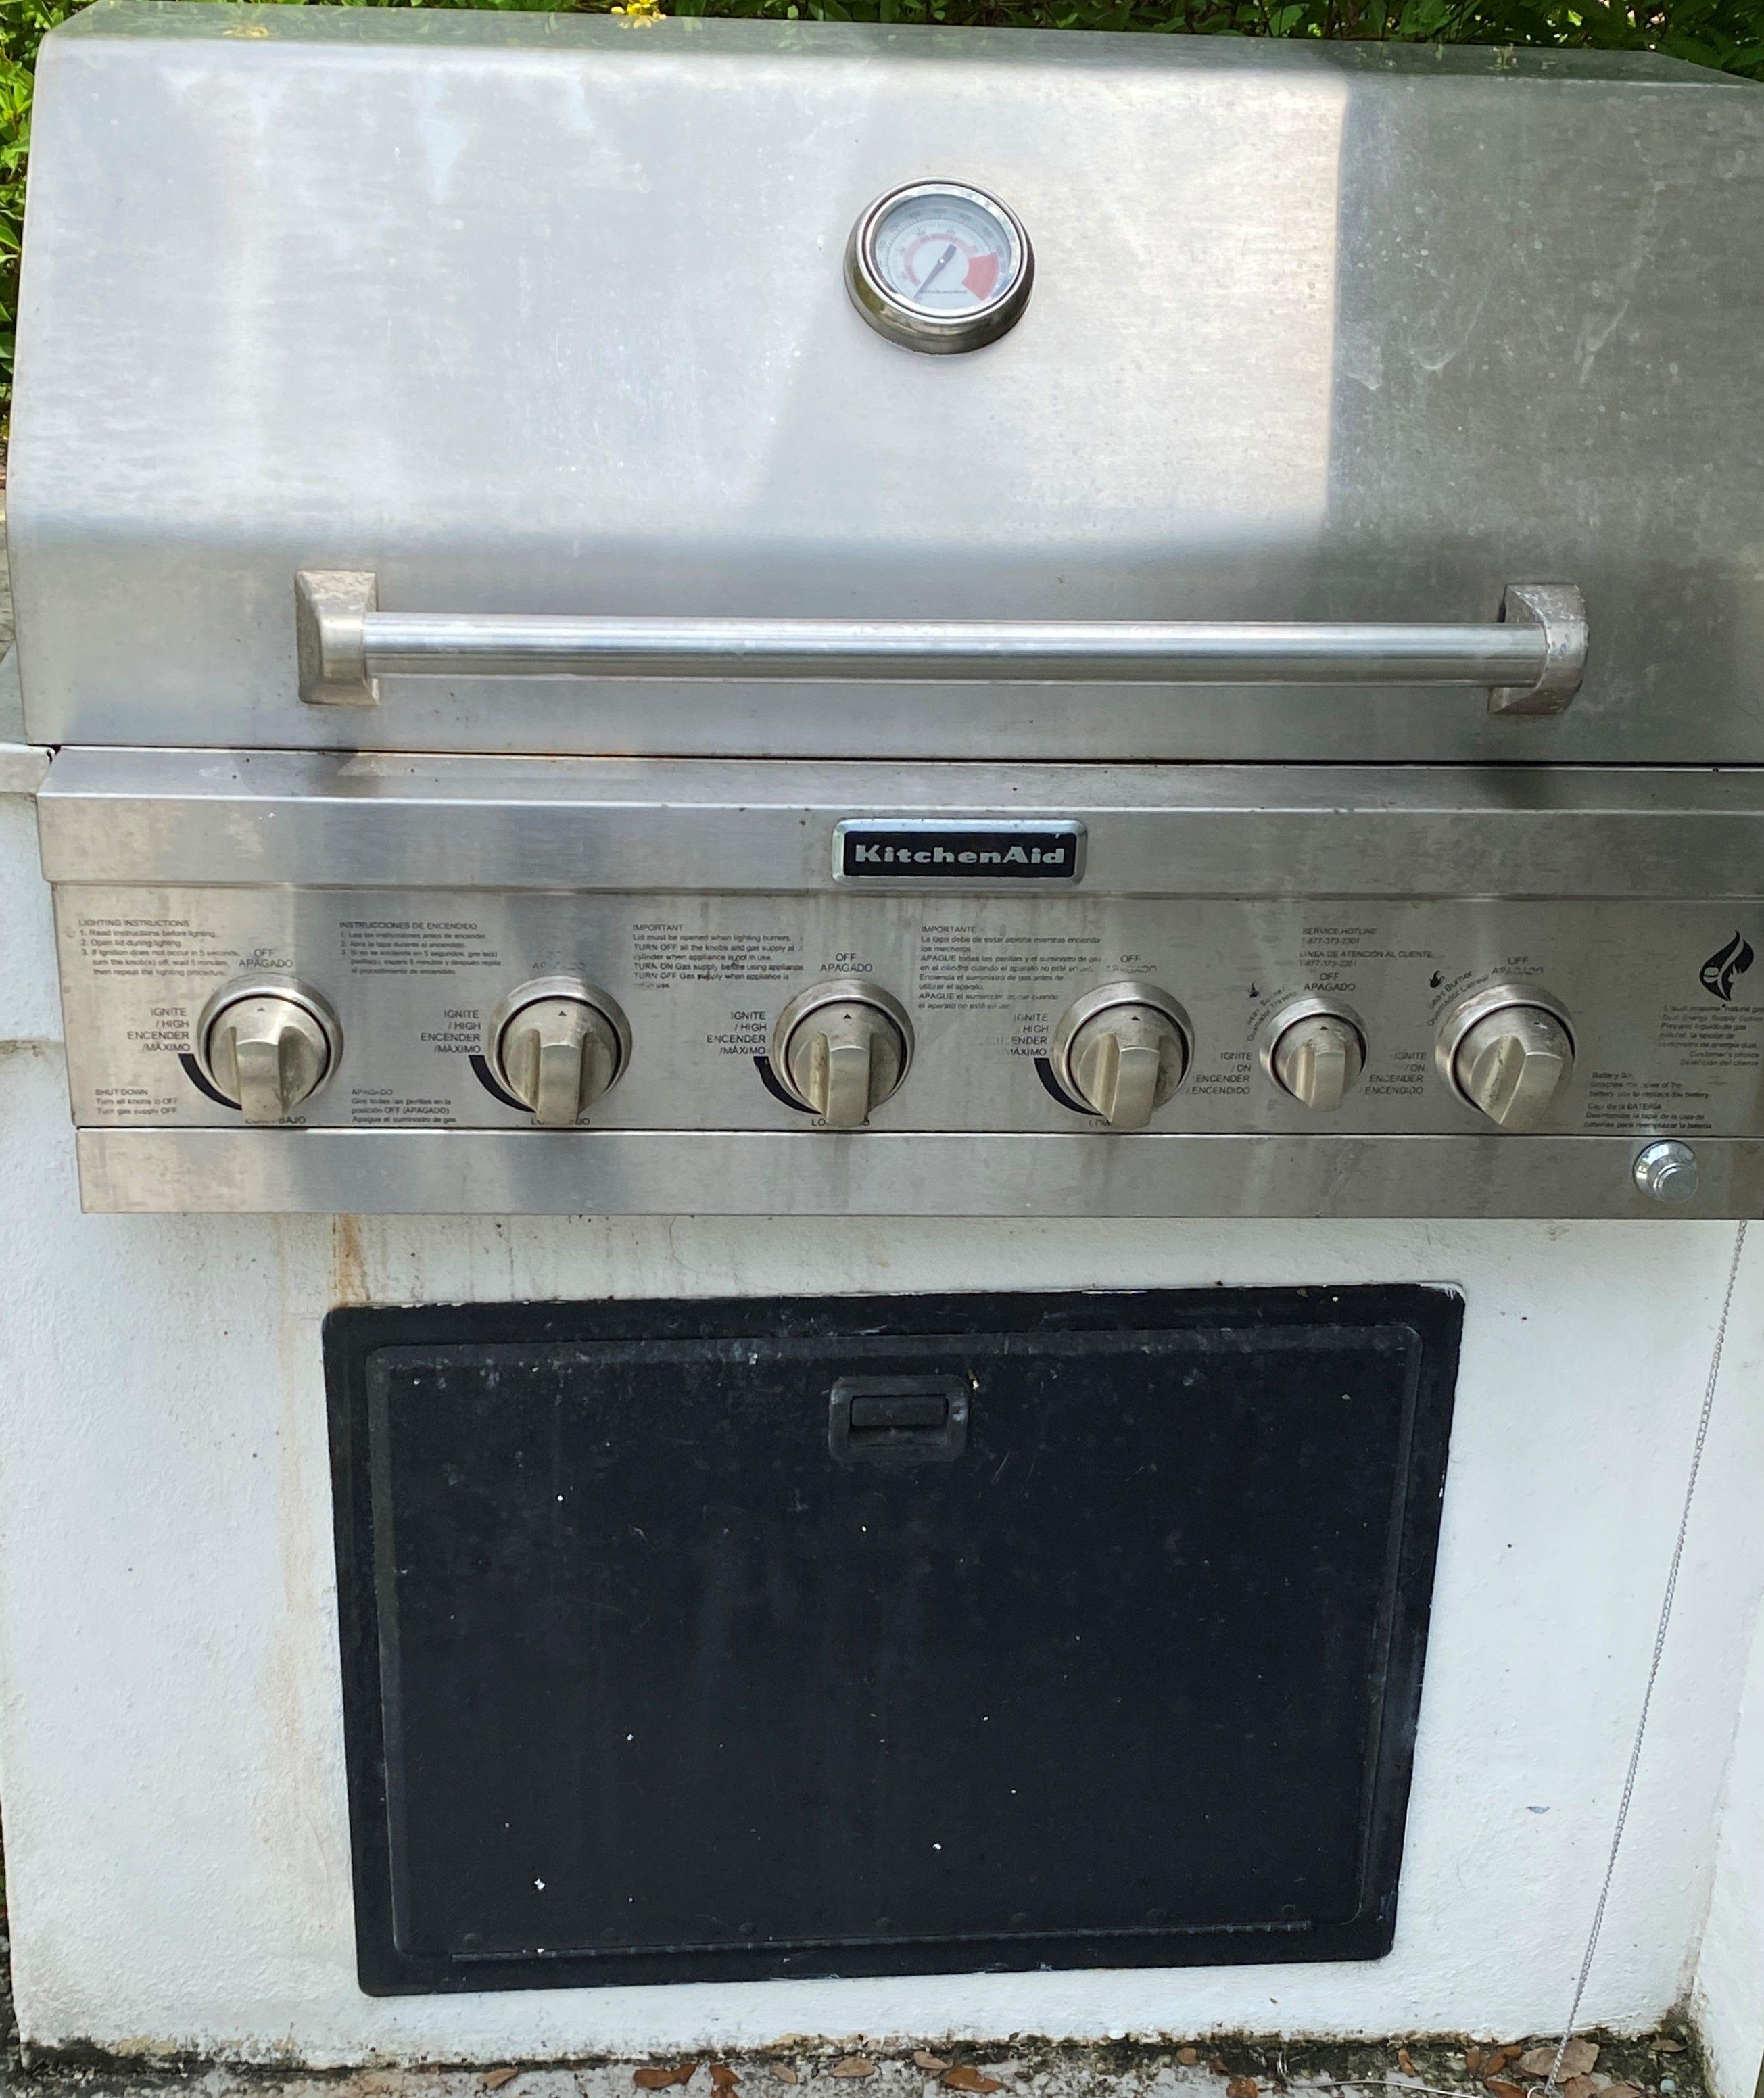 Kitchenaid 36" Drop In Propane BBQ. All Stainless Steel With A 7' x 48" Granite Counter System And A